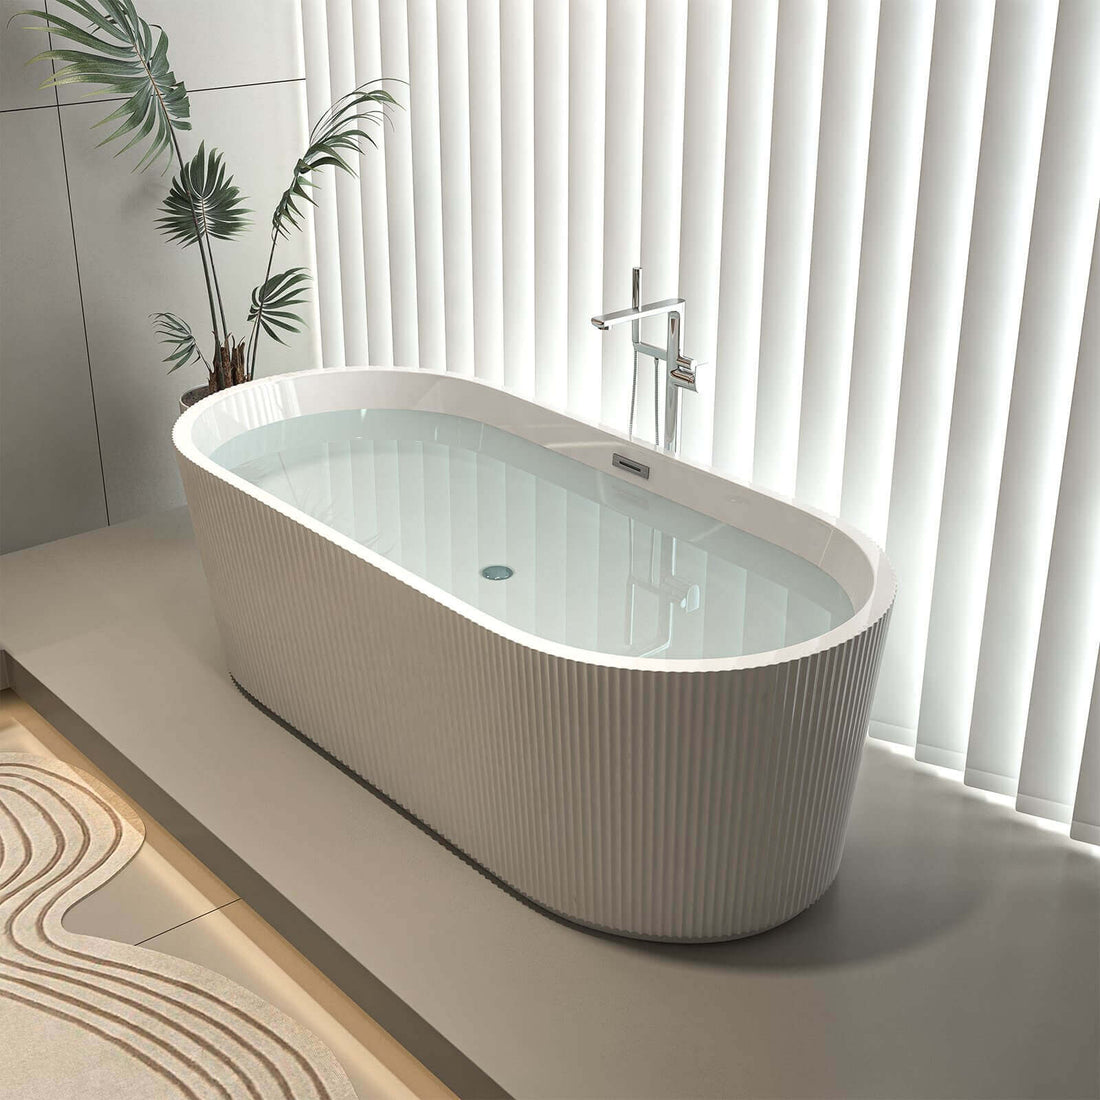 59 inch Fluted Oval Soaking Tub